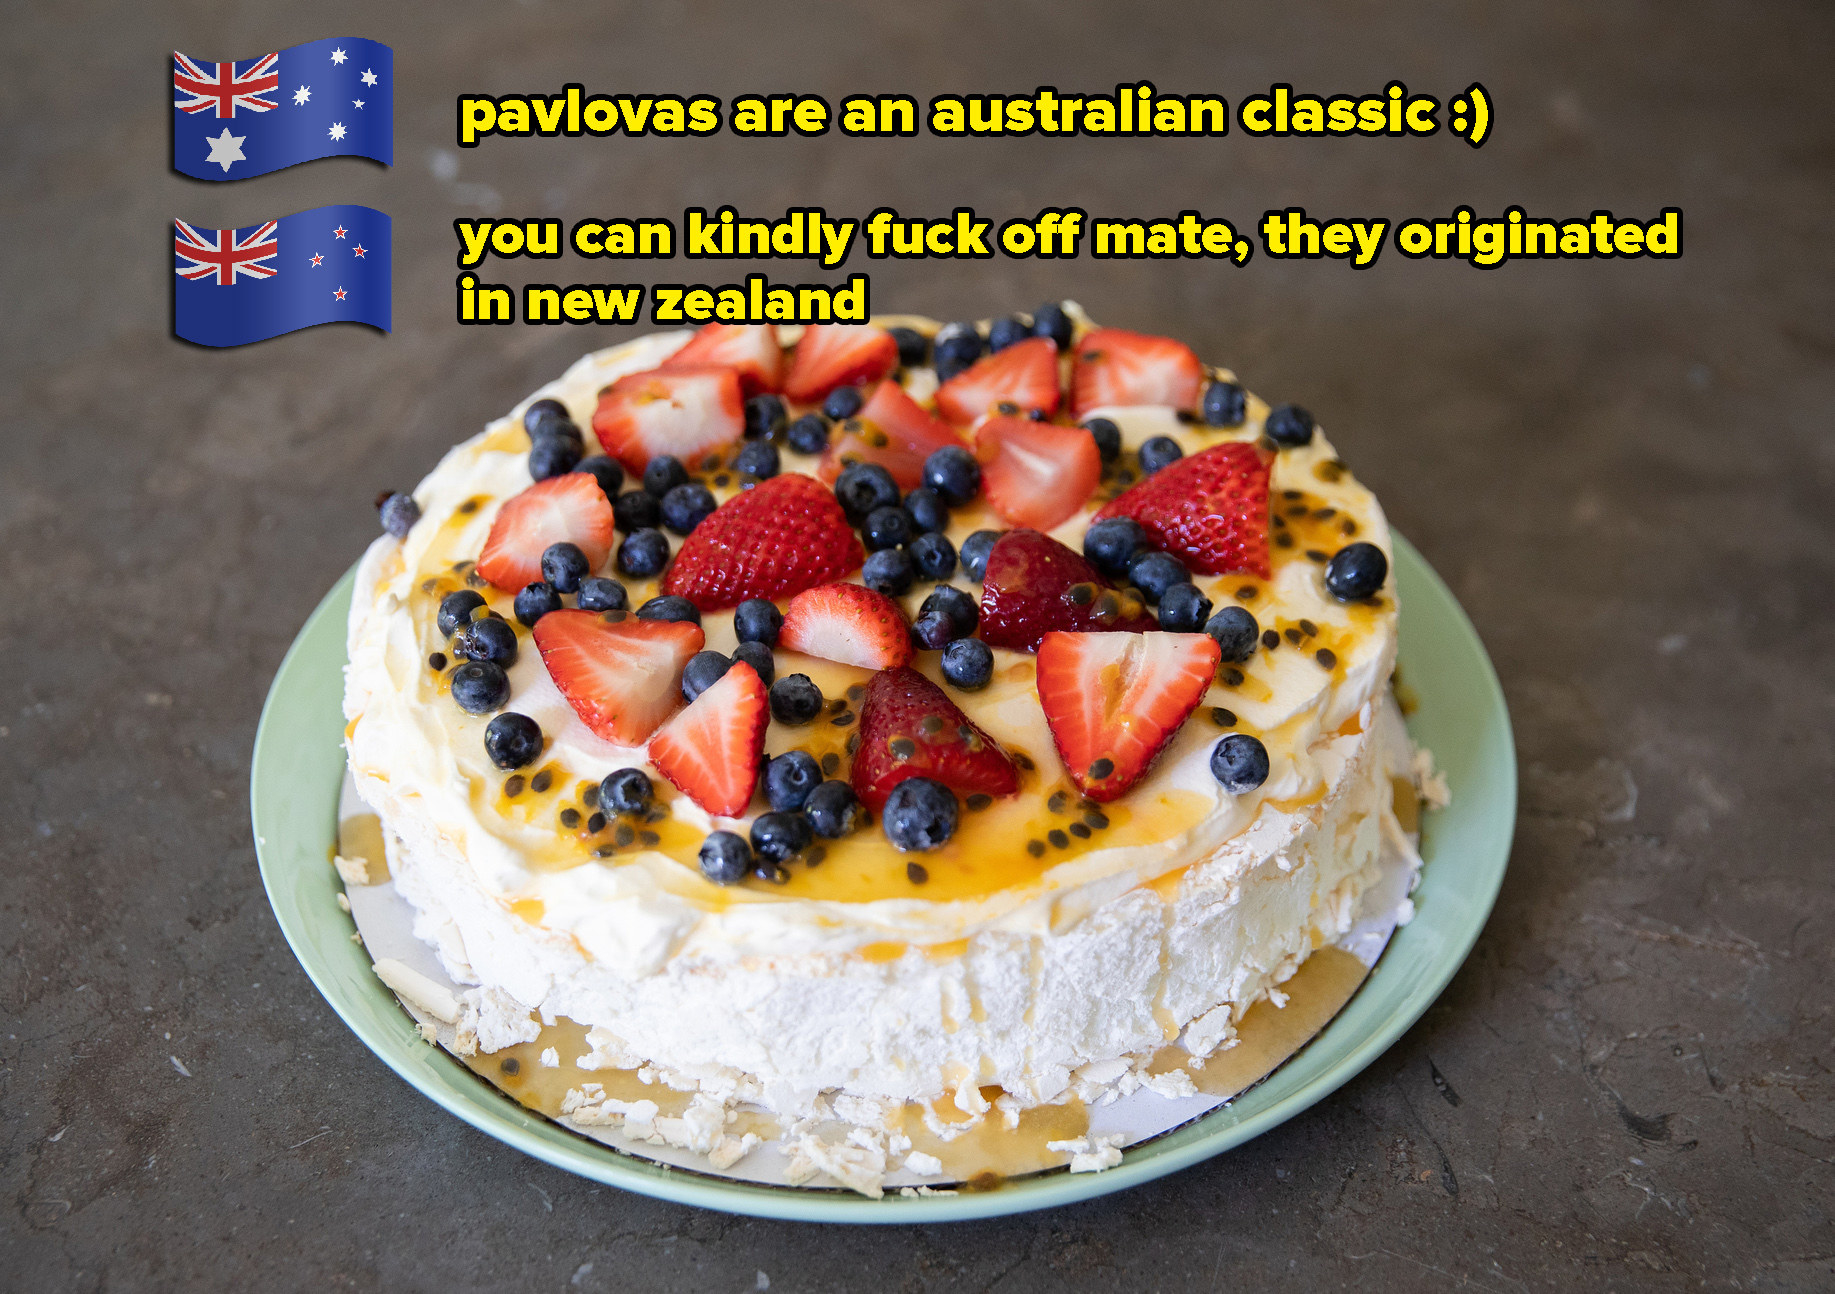 A pavlova — Australians and New Zealanders often argue about where this dessert originated from